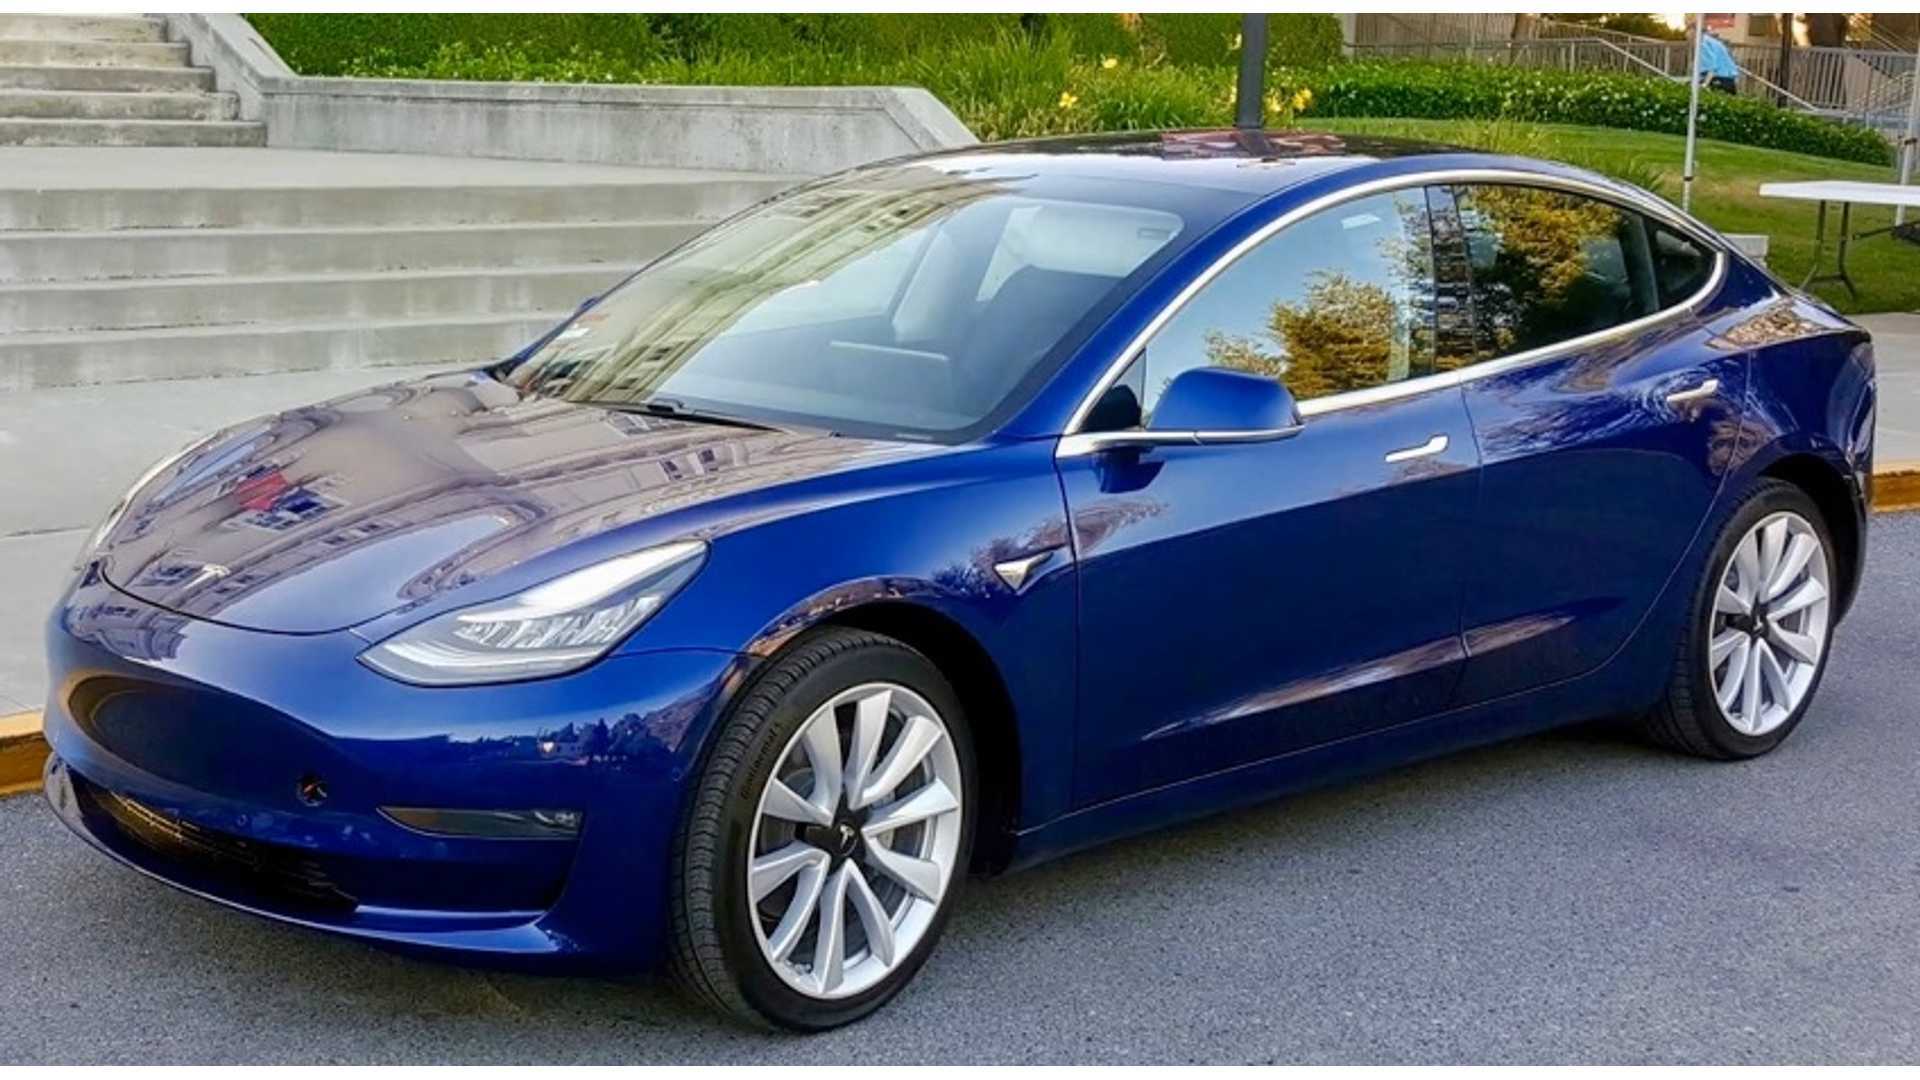 first-images-surface-of-tesla-model-3-aero-wheel-covers-removed.jpg